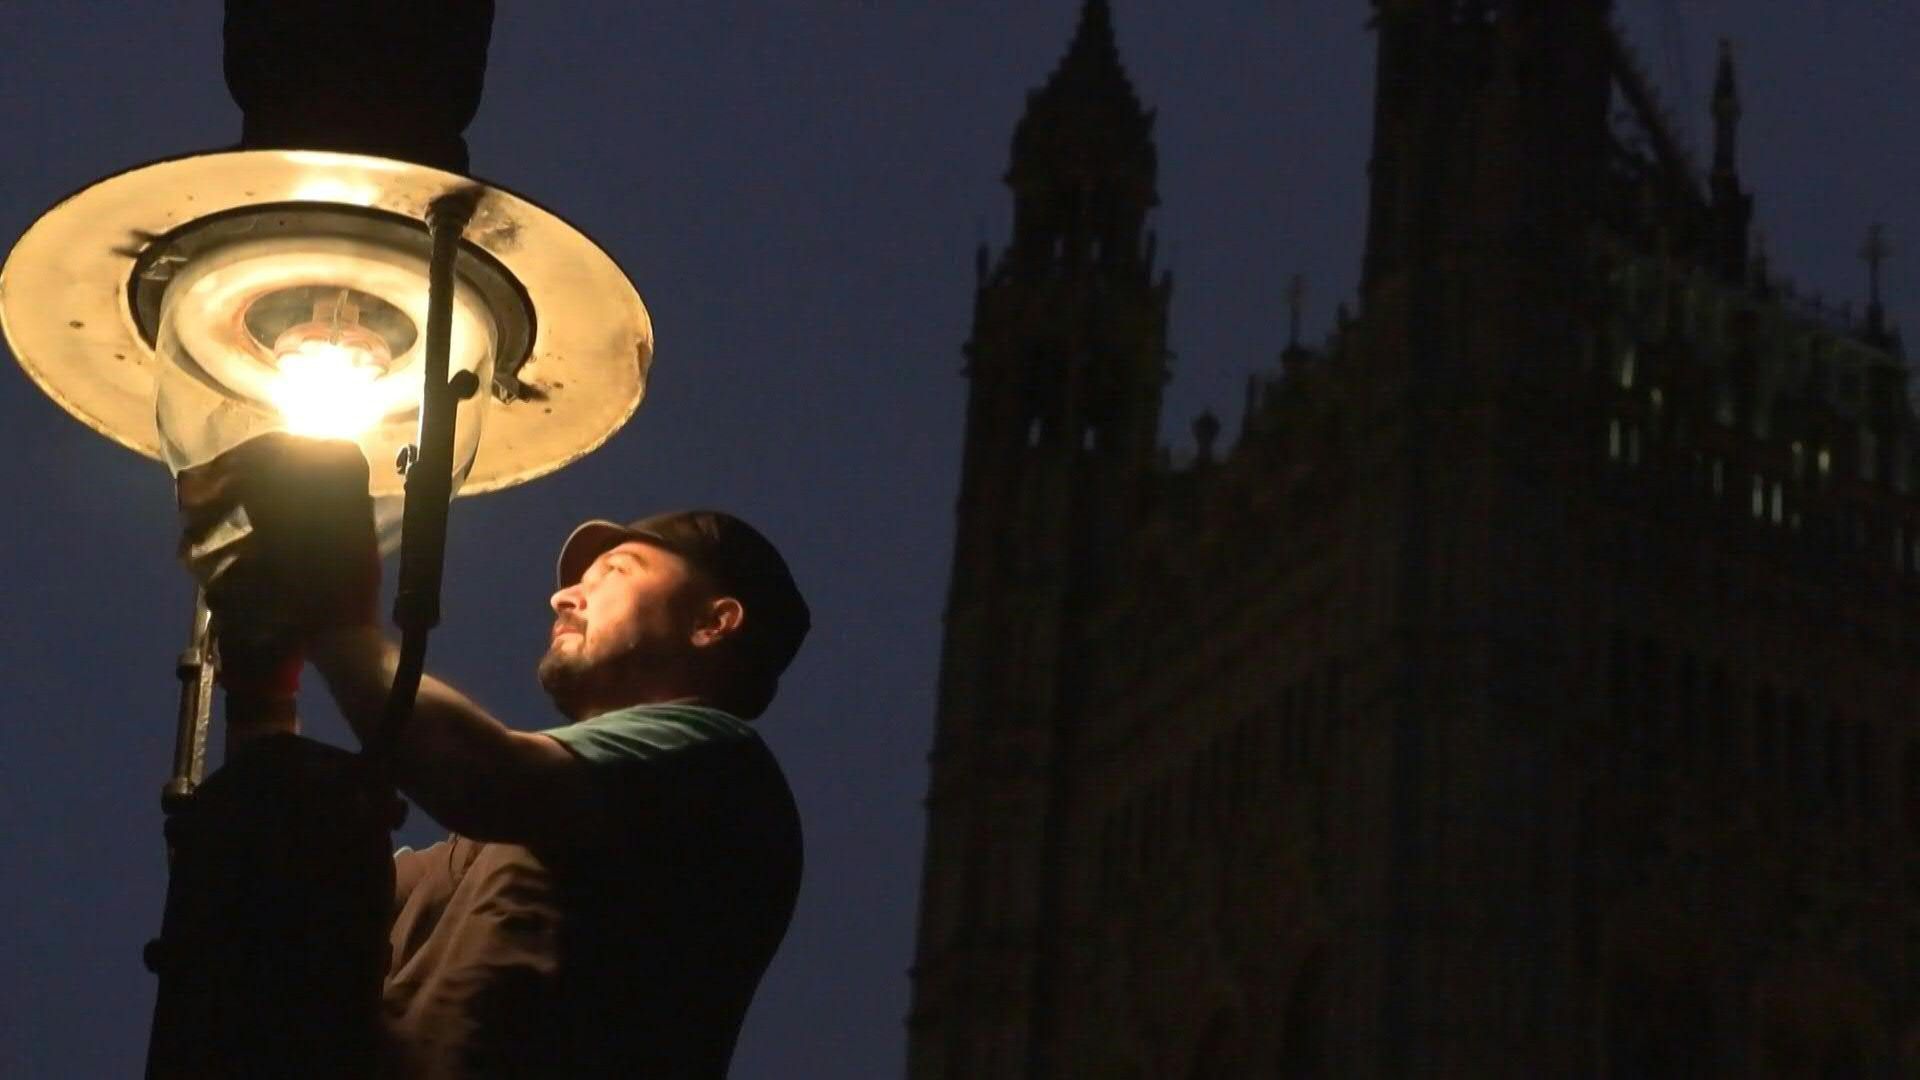 Historic gas lanterns in London allowed to stay lit